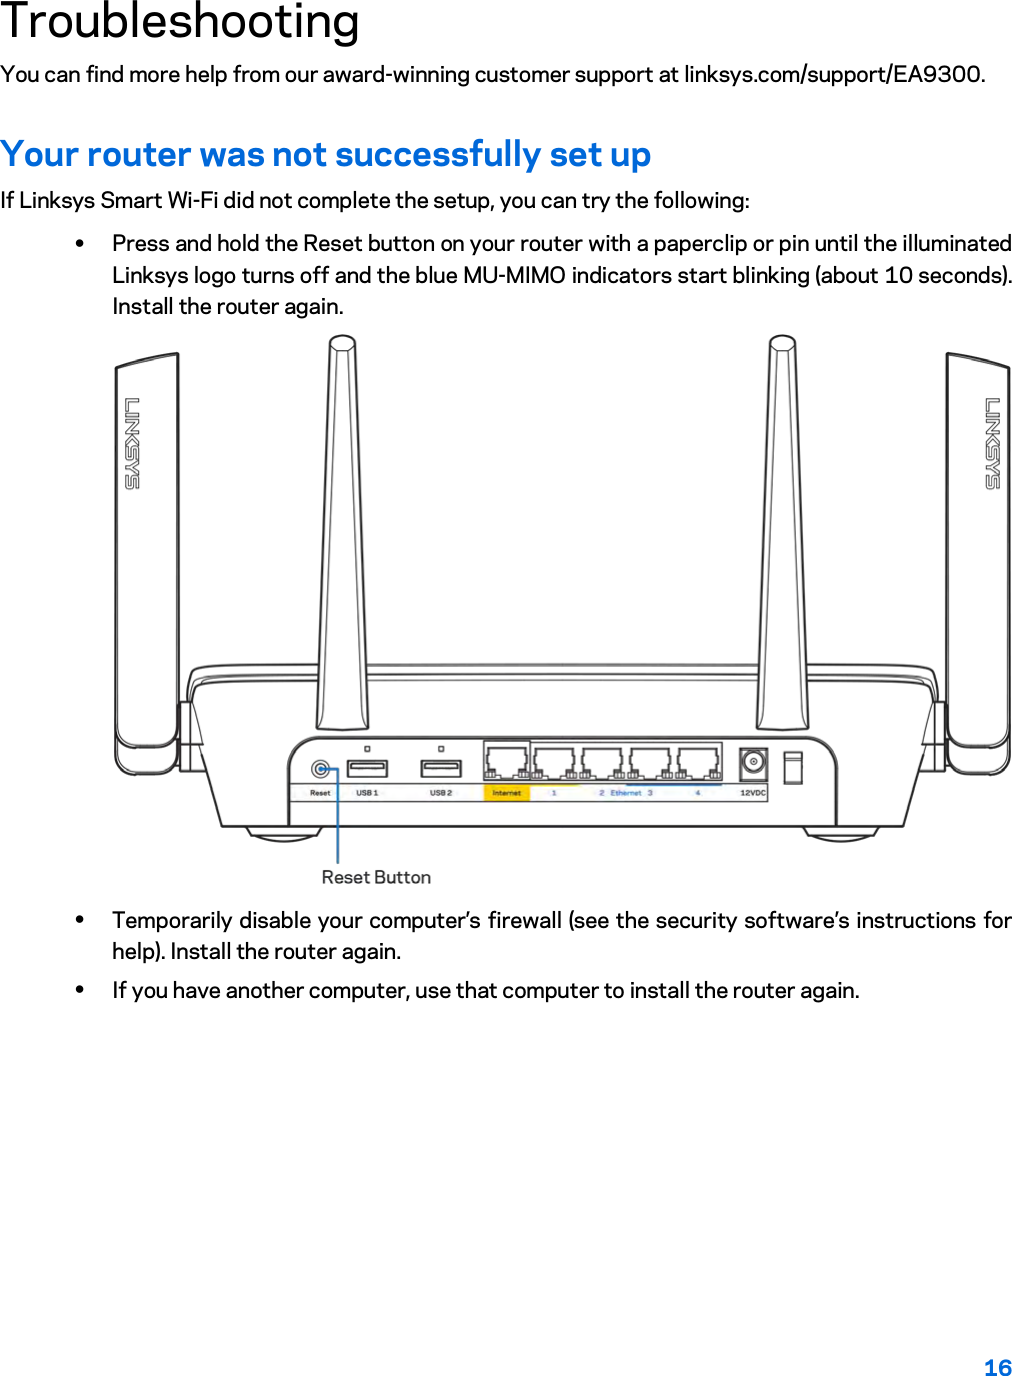 16  Troubleshooting You can find more help from our award-winning customer support at linksys.com/support/EA9300. Your router was not successfully set up If Linksys Smart Wi-Fi did not complete the setup, you can try the following: • Press and hold the Reset button on your router with a paperclip or pin until the illuminated Linksys logo turns off and the blue MU-MIMO indicators start blinking (about 10 seconds). Install the router again.  • Temporarily disable your computer’s firewall (see the security software’s instructions for help). Install the router again. • If you have another computer, use that computer to install the router again. 